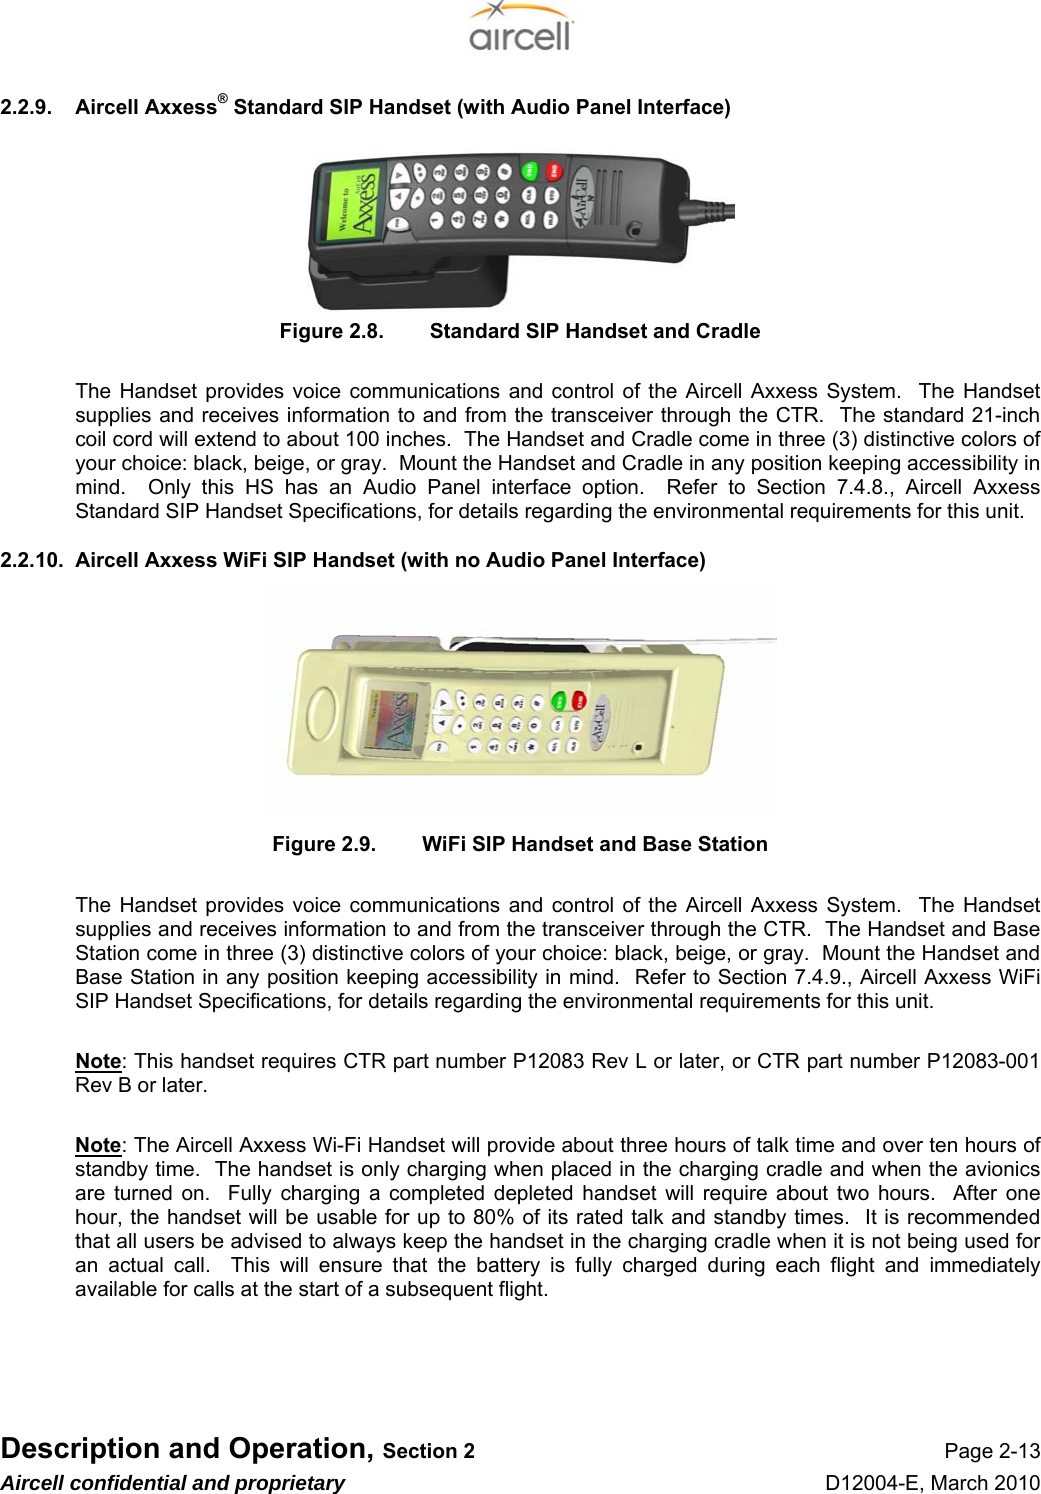  Description and Operation, Section 2 Page 2-13 Aircell confidential and proprietary D12004-E, March 2010 2.2.9.  Aircell Axxess® Standard SIP Handset (with Audio Panel Interface)       Figure 2.8.  Standard SIP Handset and Cradle  The Handset provides voice communications and control of the Aircell Axxess System.  The Handset supplies and receives information to and from the transceiver through the CTR.  The standard 21-inch coil cord will extend to about 100 inches.  The Handset and Cradle come in three (3) distinctive colors of your choice: black, beige, or gray.  Mount the Handset and Cradle in any position keeping accessibility in mind.  Only this HS has an Audio Panel interface option.  Refer to Section 7.4.8., Aircell Axxess Standard SIP Handset Specifications, for details regarding the environmental requirements for this unit. 2.2.10.  Aircell Axxess WiFi SIP Handset (with no Audio Panel Interface)         Figure 2.9.  WiFi SIP Handset and Base Station  The Handset provides voice communications and control of the Aircell Axxess System.  The Handset supplies and receives information to and from the transceiver through the CTR.  The Handset and Base Station come in three (3) distinctive colors of your choice: black, beige, or gray.  Mount the Handset and Base Station in any position keeping accessibility in mind.  Refer to Section 7.4.9., Aircell Axxess WiFi SIP Handset Specifications, for details regarding the environmental requirements for this unit.  Note: This handset requires CTR part number P12083 Rev L or later, or CTR part number P12083-001 Rev B or later.  Note: The Aircell Axxess Wi-Fi Handset will provide about three hours of talk time and over ten hours of standby time.  The handset is only charging when placed in the charging cradle and when the avionics are turned on.  Fully charging a completed depleted handset will require about two hours.  After one hour, the handset will be usable for up to 80% of its rated talk and standby times.  It is recommended that all users be advised to always keep the handset in the charging cradle when it is not being used for an actual call.  This will ensure that the battery is fully charged during each flight and immediately available for calls at the start of a subsequent flight.    